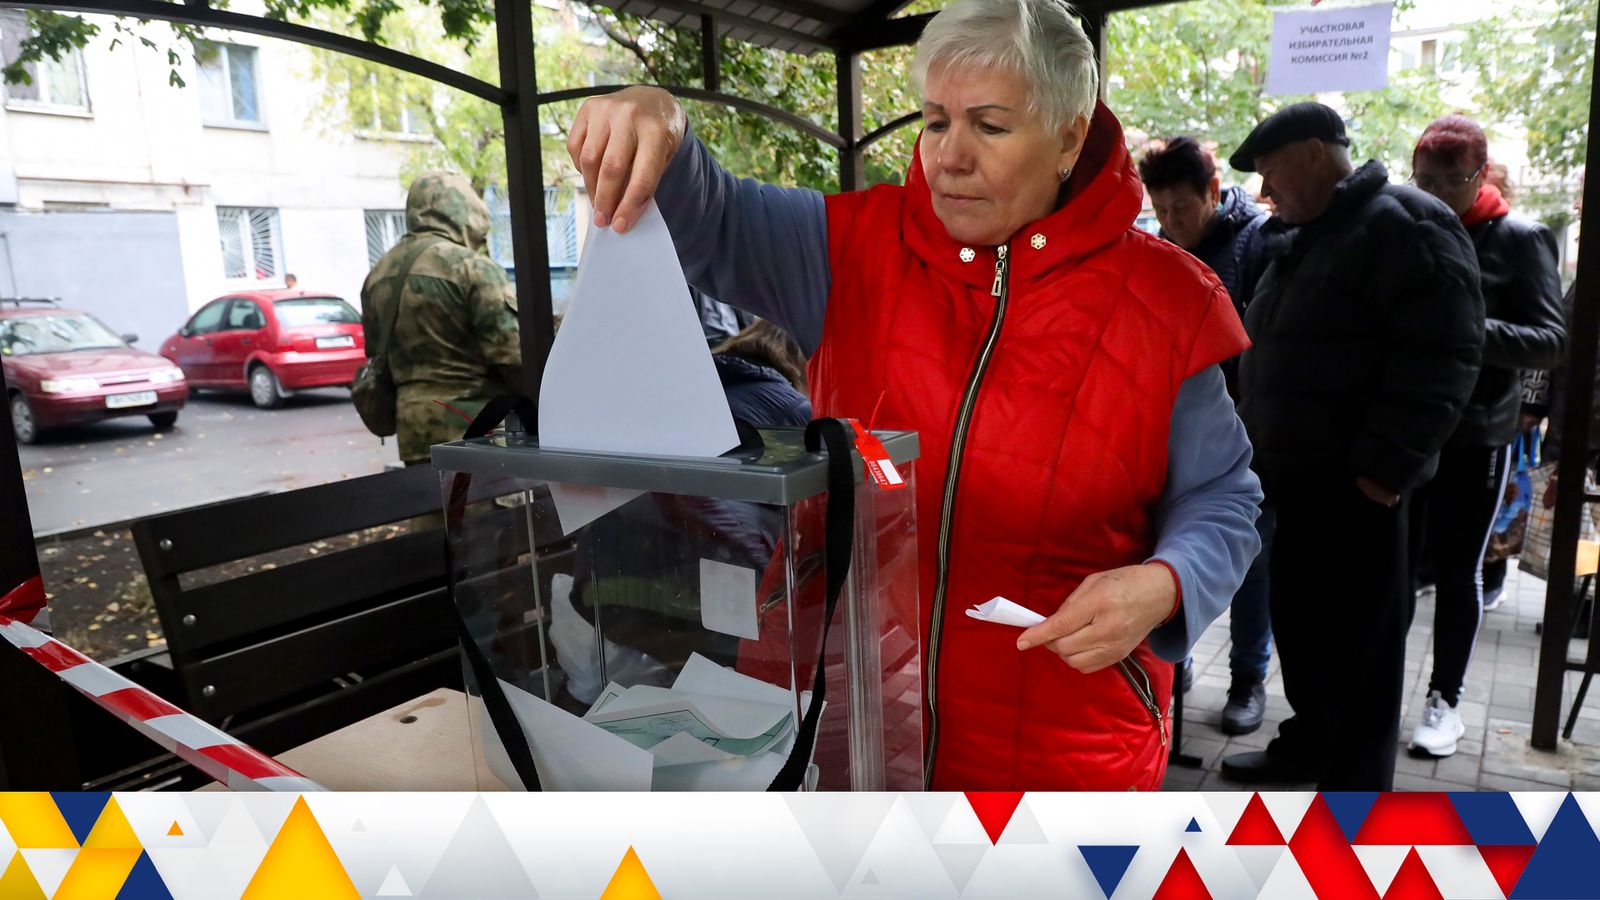 ‘Sabotage’ Russian army from the inside out, Zelenskyy urges conscripted Ukrainians; voting begins in ‘sham’ referendums | War latest